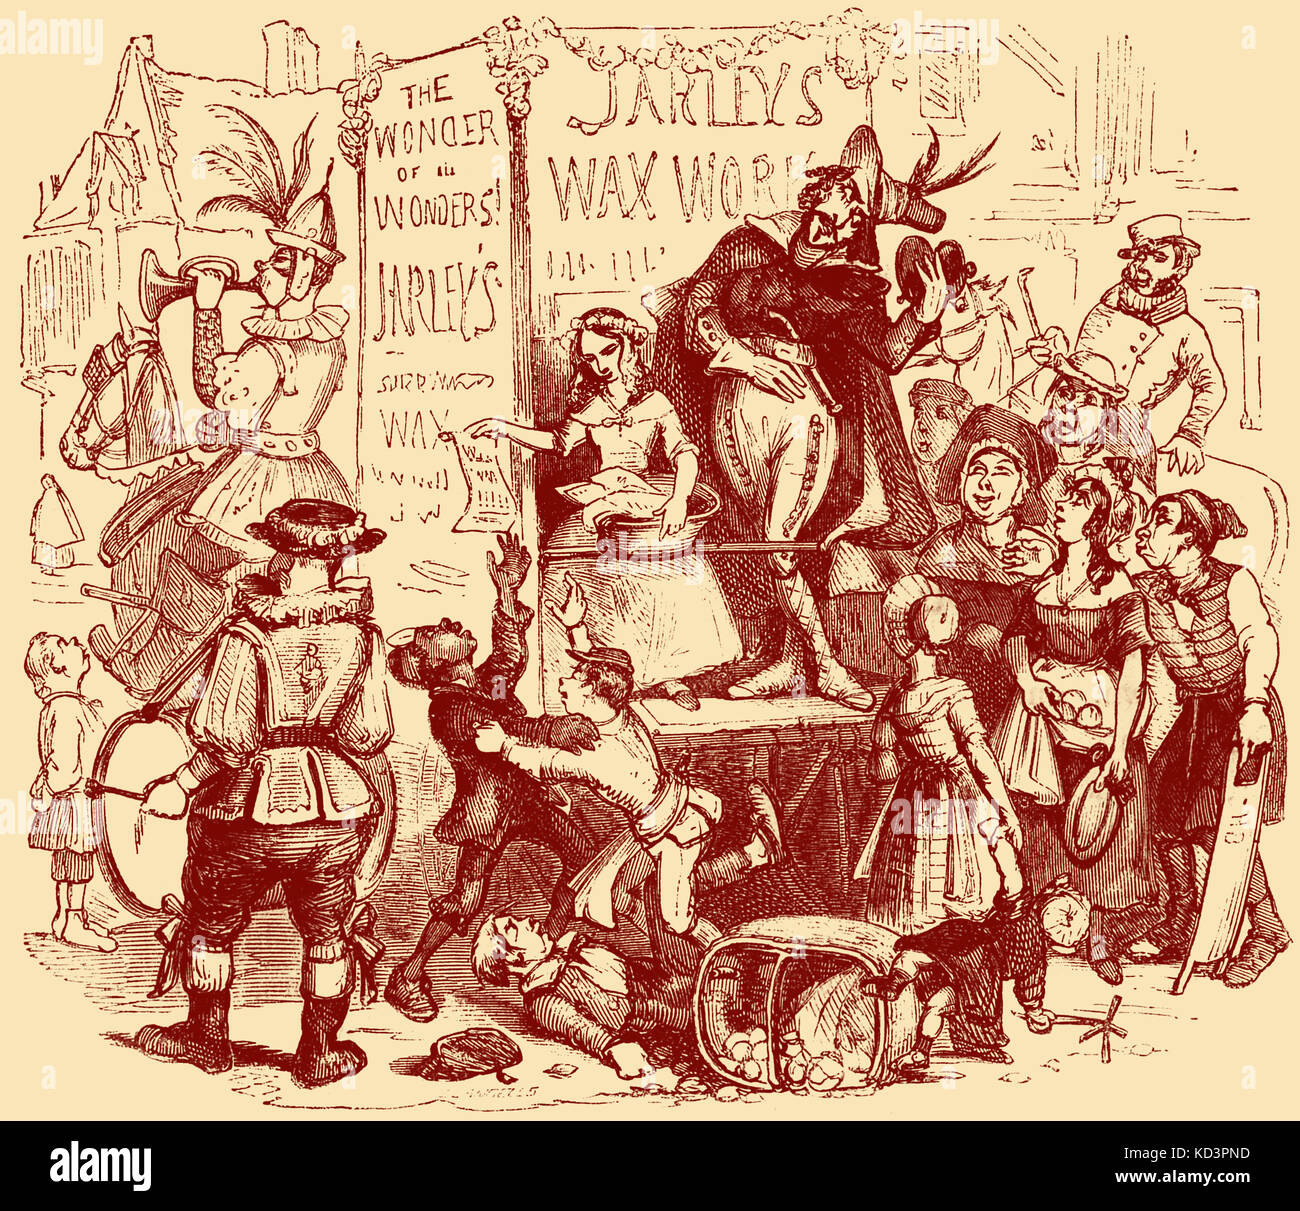 Charles Dickens 's ' The Old Curiosity Shop'.  First published 1841. Description: Little Nell and Jarley's wax work. Chapter Tewnty-Nine. Illustration by Hablot K. Browne  -  'Phiz' (1815-1882) CD:  English novelist 7 February 1812 – 9 June 1870 Stock Photo